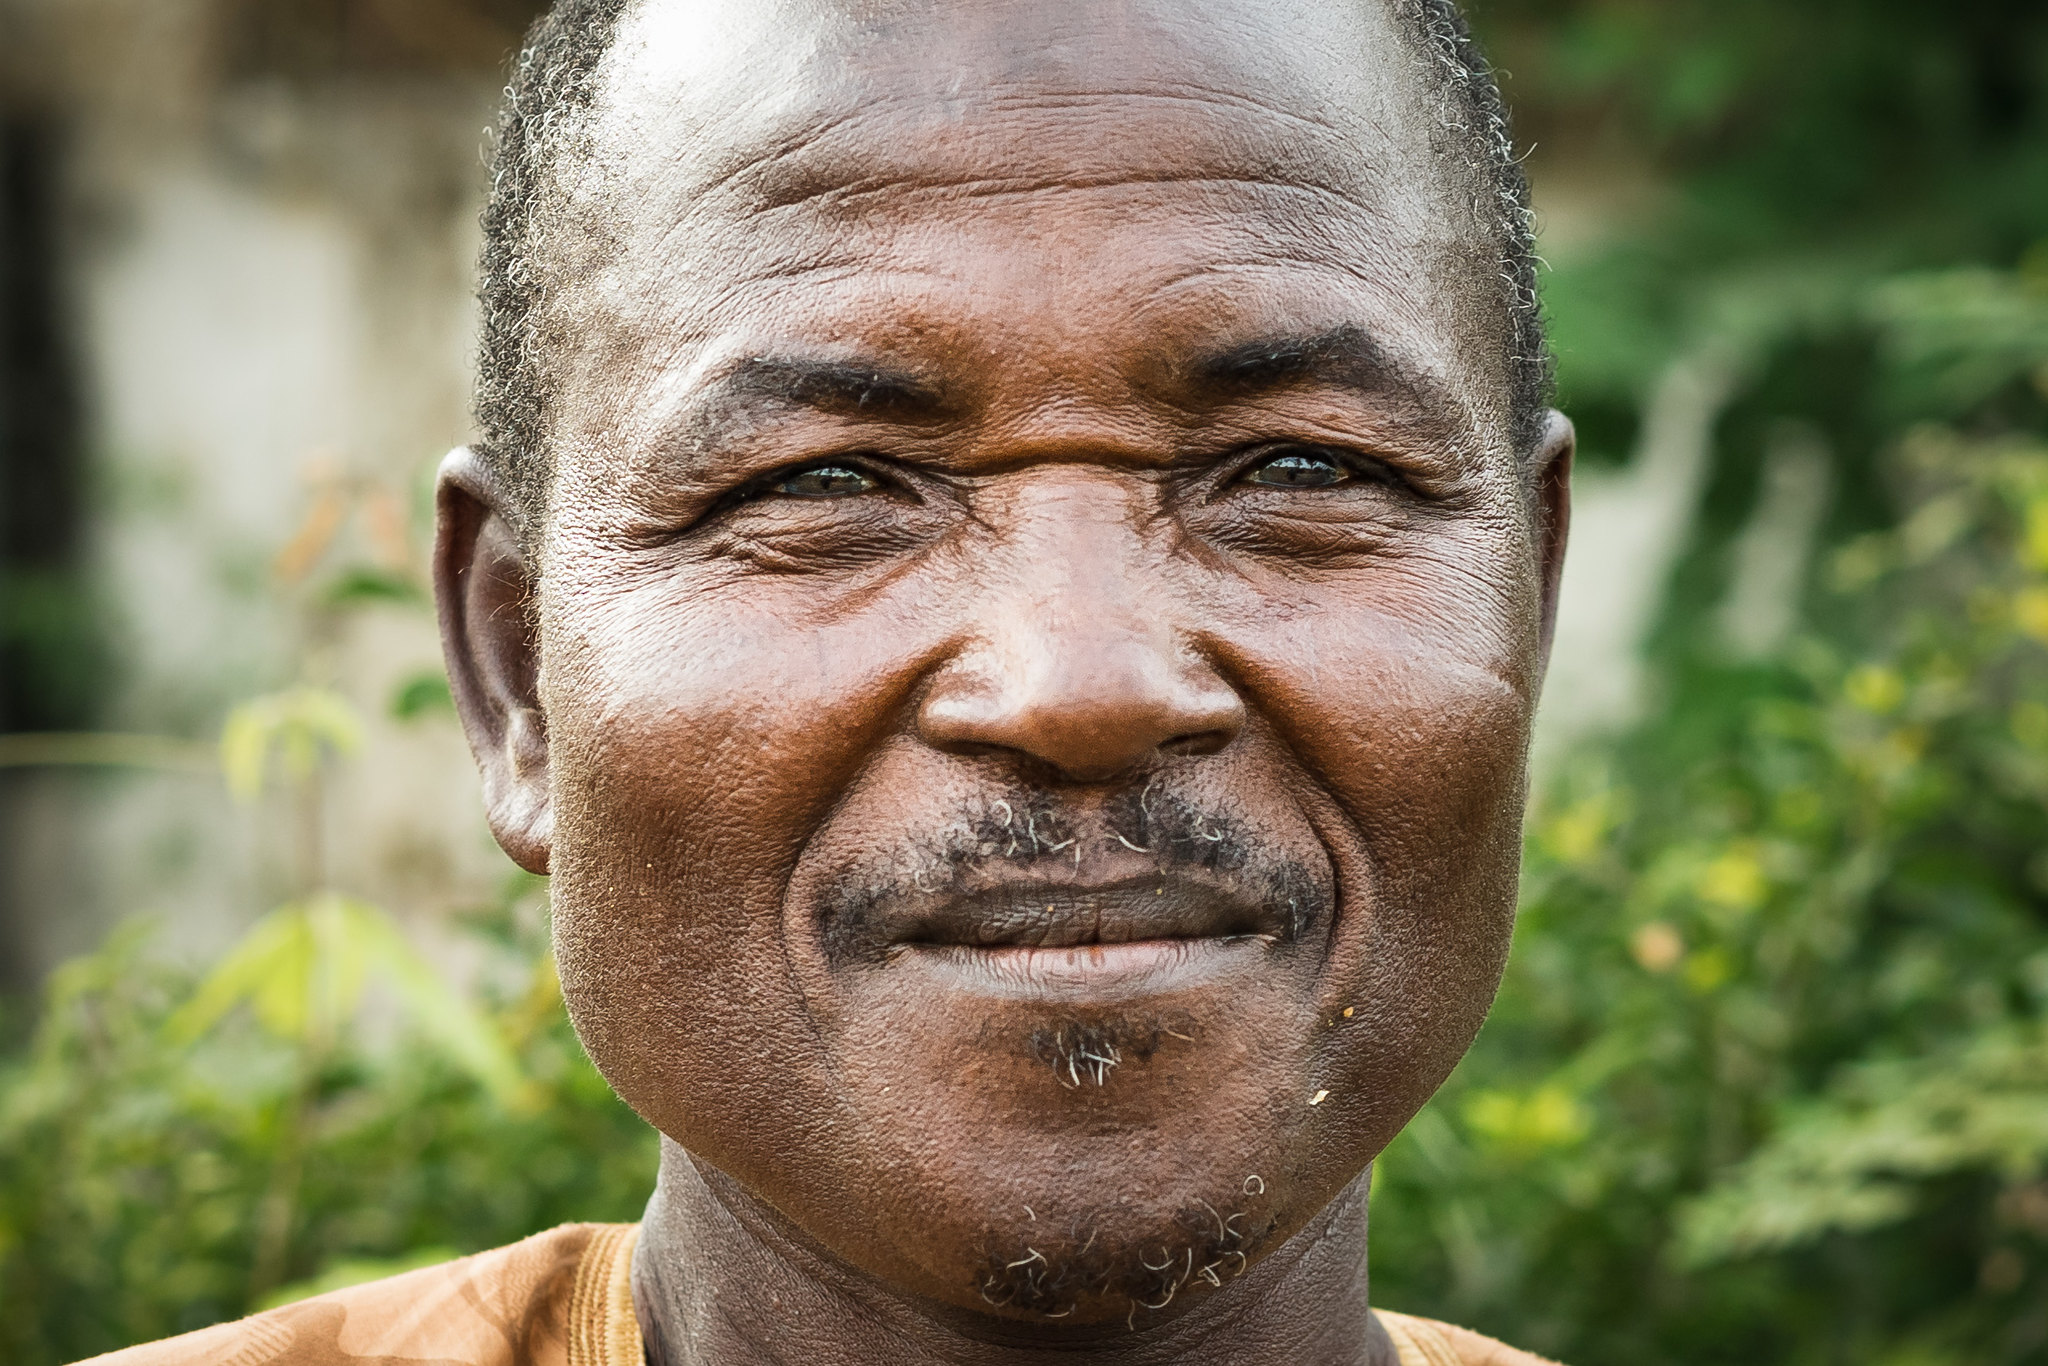 Aged African man